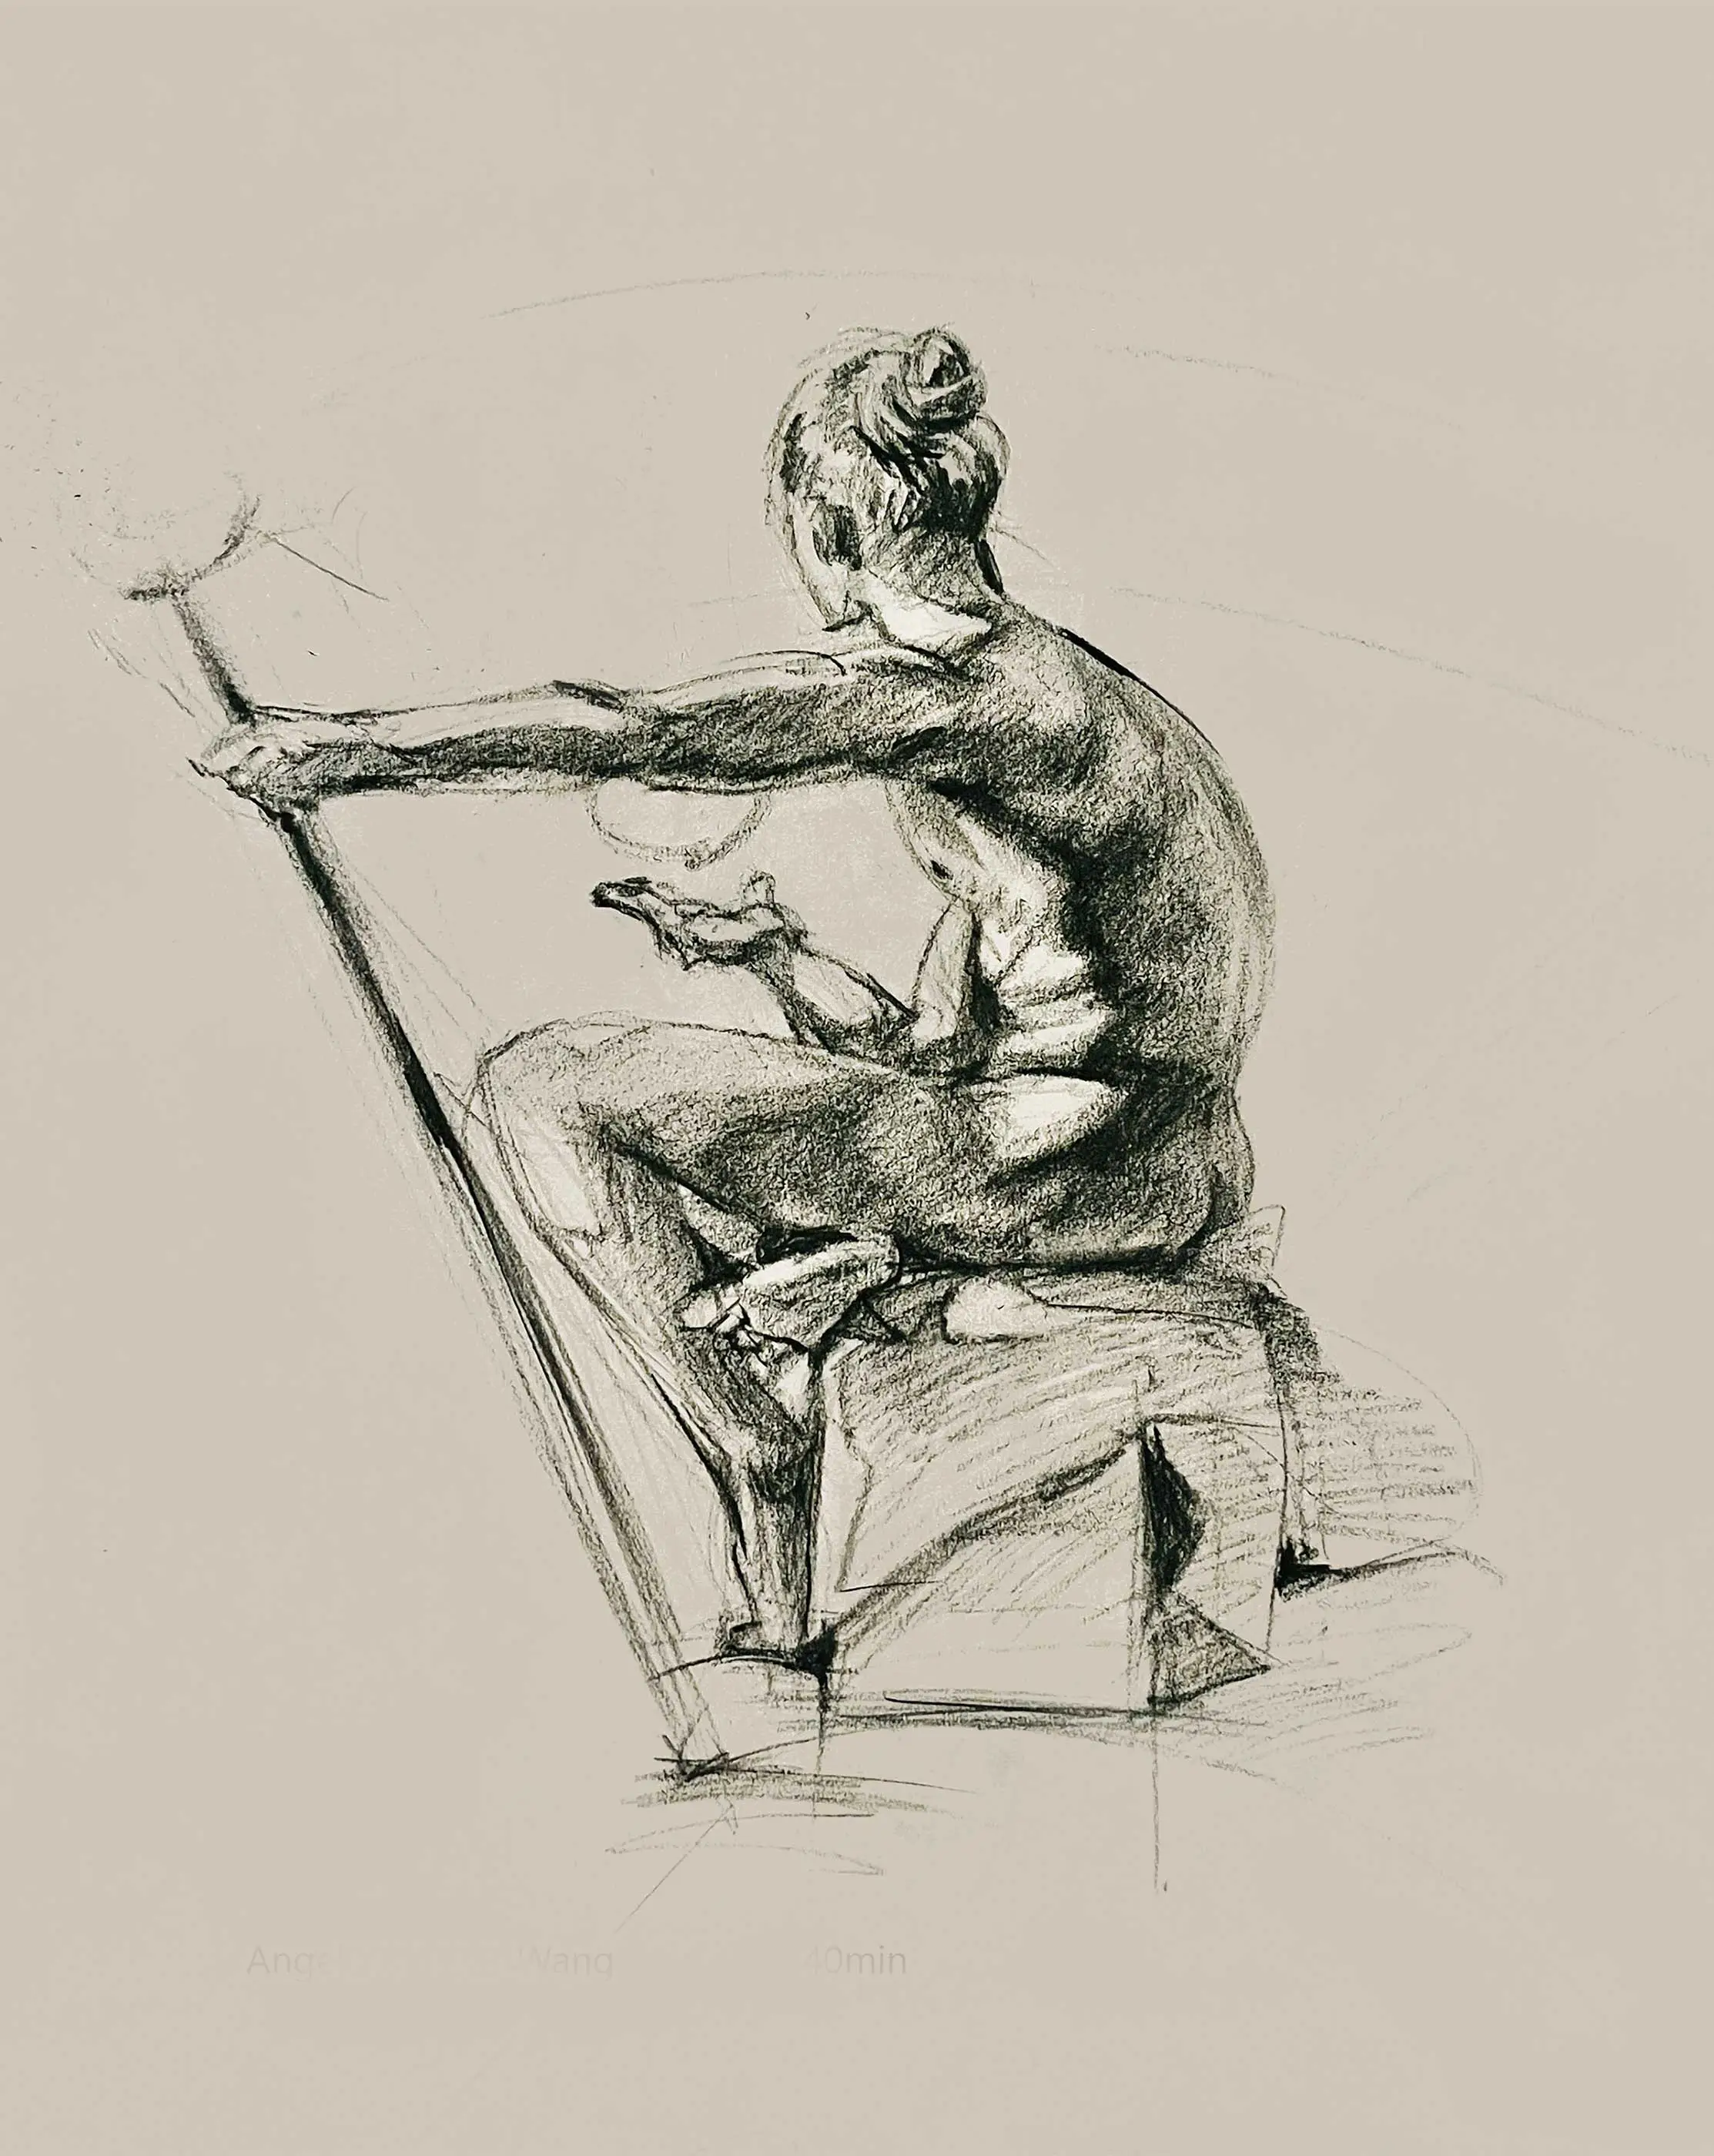 A sketch of a man sitting on a box, holding a staff.